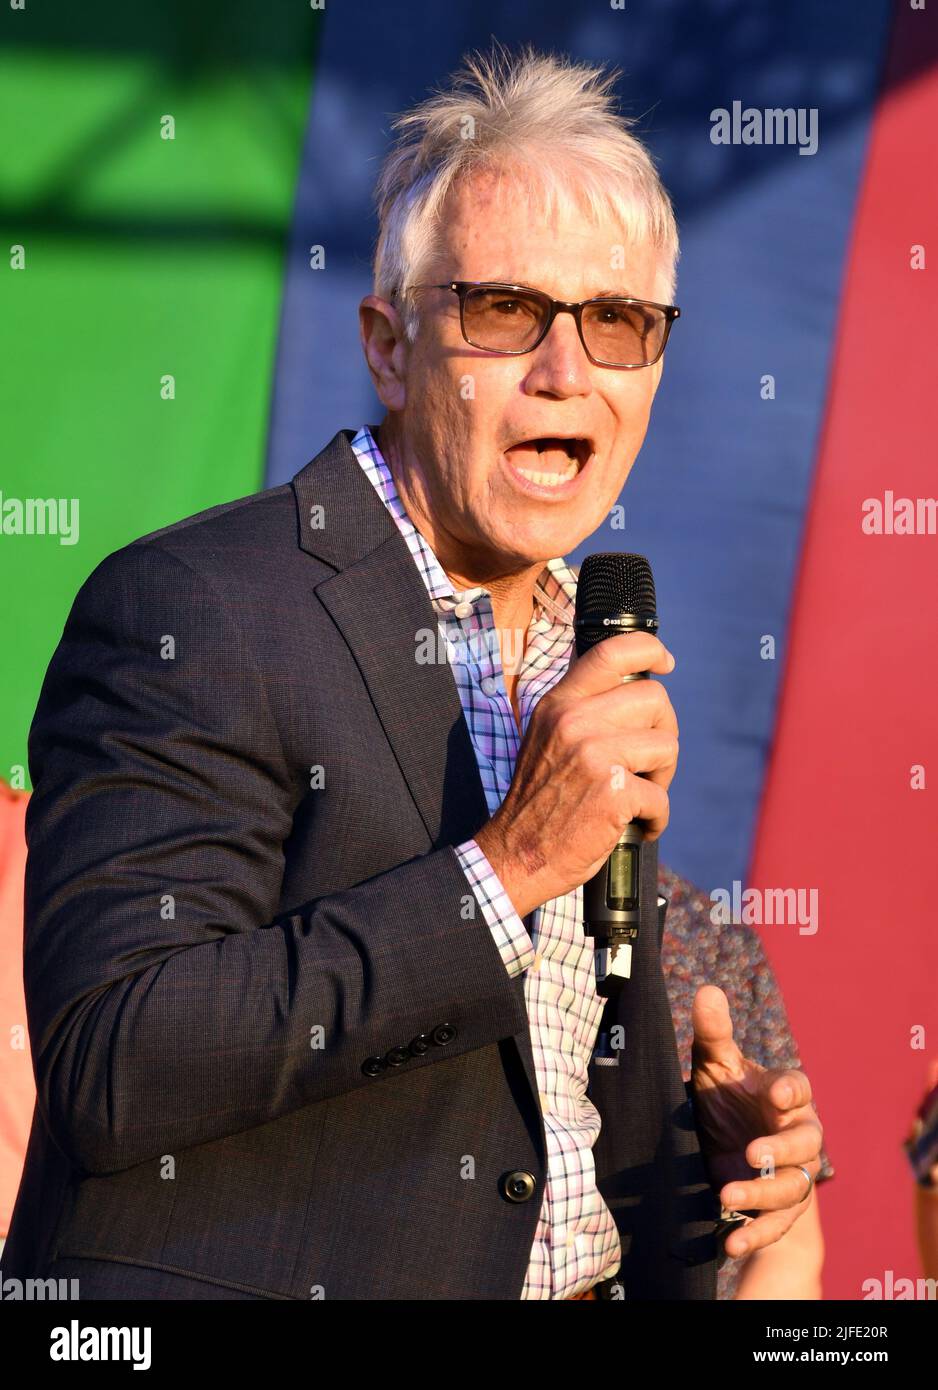 Los Angeles, USA. 01st July, 2022. LA District Attorney George Gascon attends the 2022 South LA Pride Community Picnic at the Norman O. Houston Park in Los Angeles, USAlifornia on July 1, 2022 Credit: Koi Sojer/Snap'n U Photos/Media Punch/Alamy Live News Stock Photo